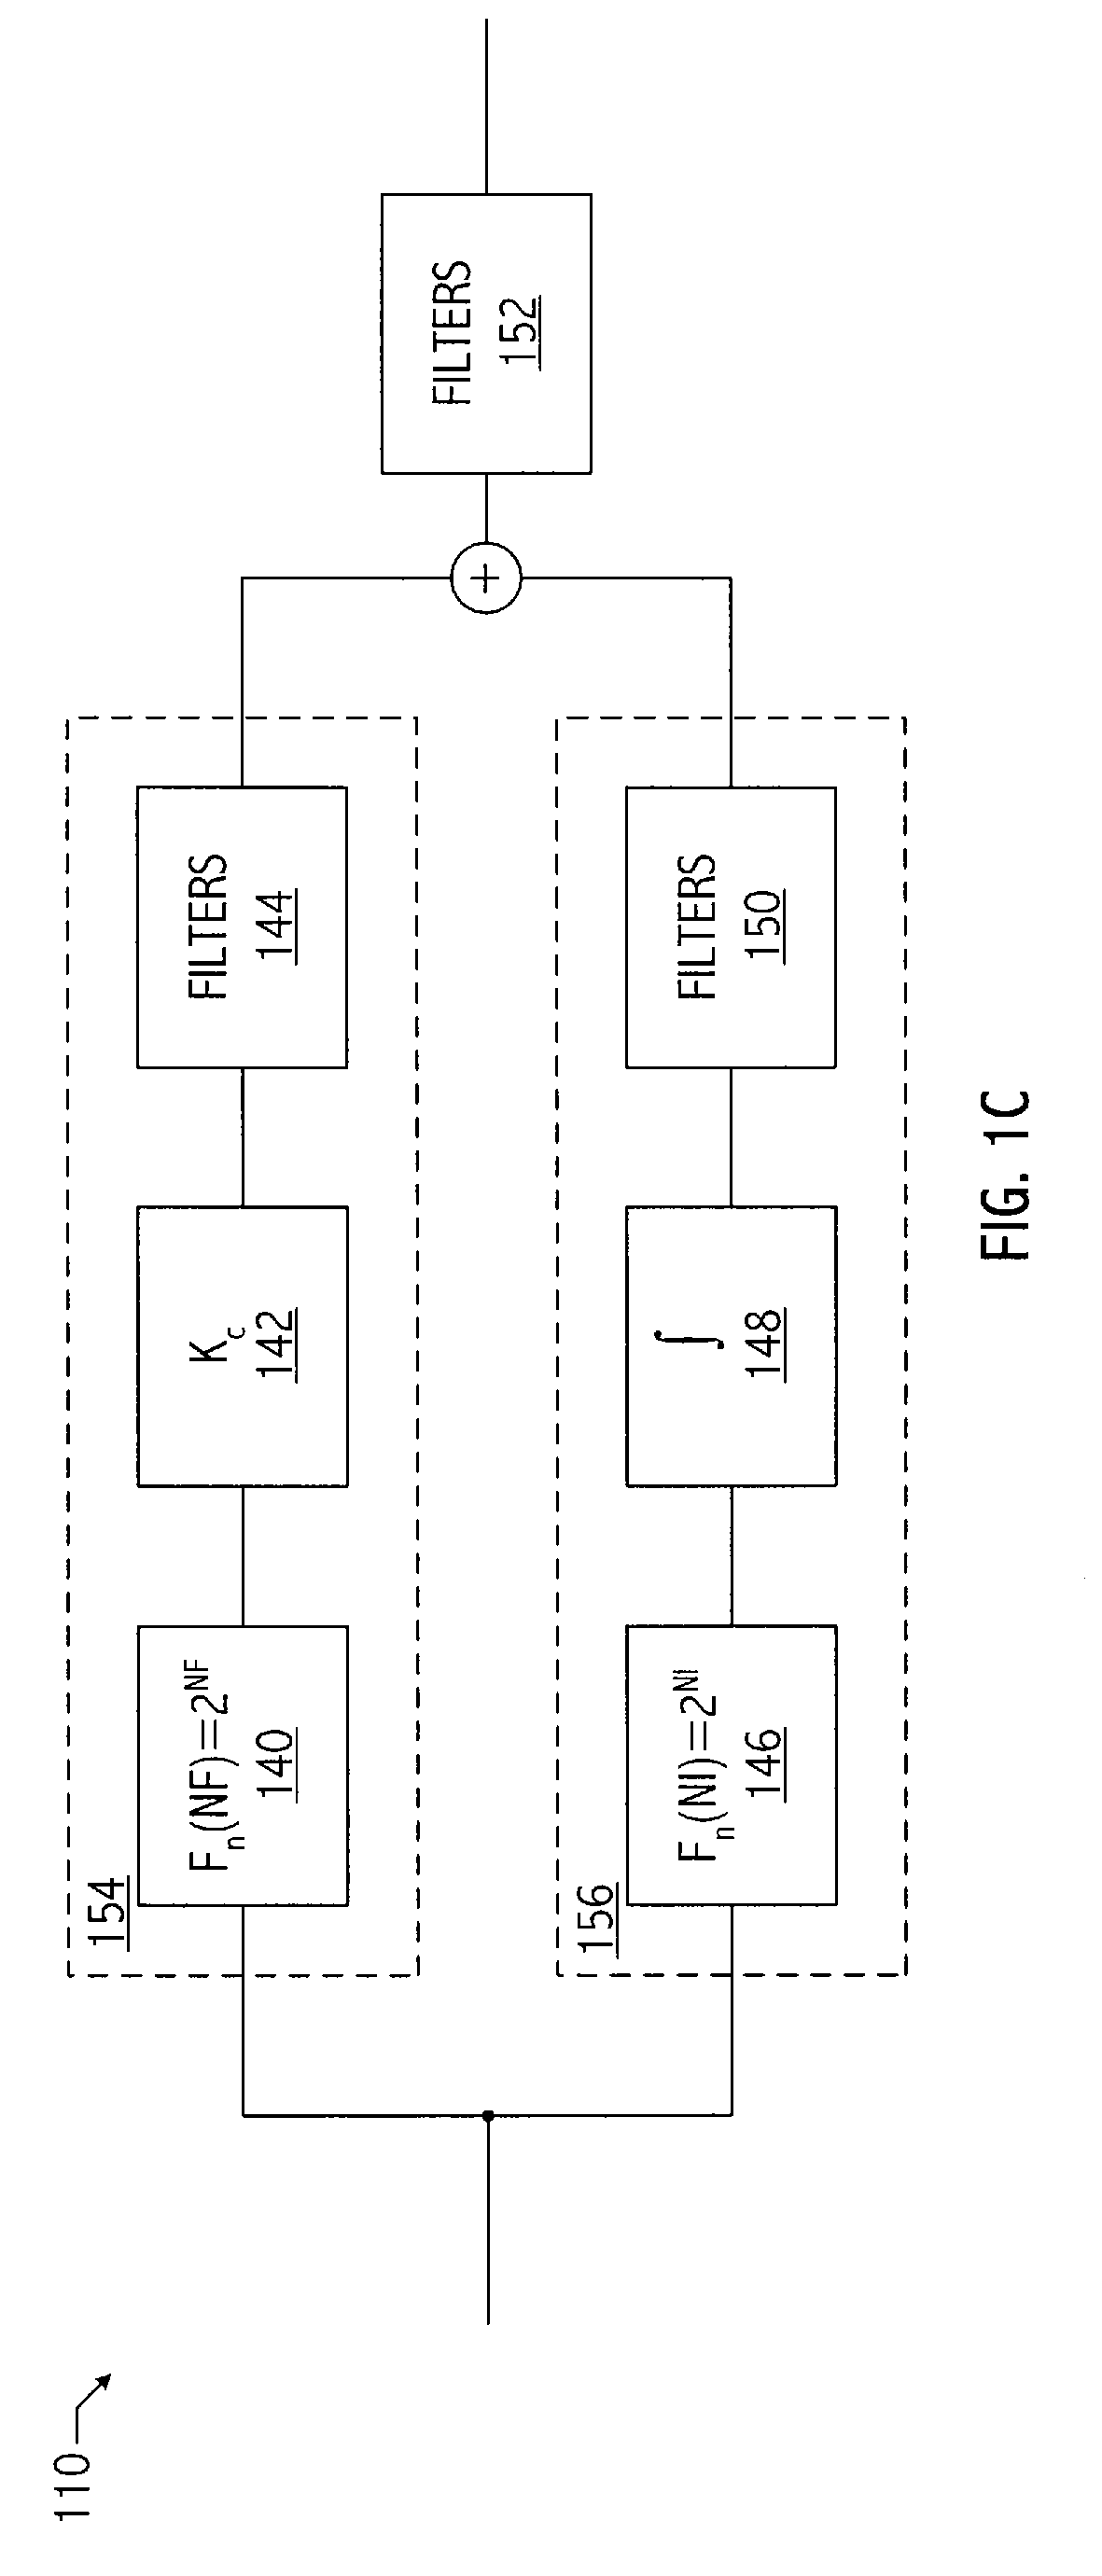 Technique for switching between input clocks in a phase-locked loop